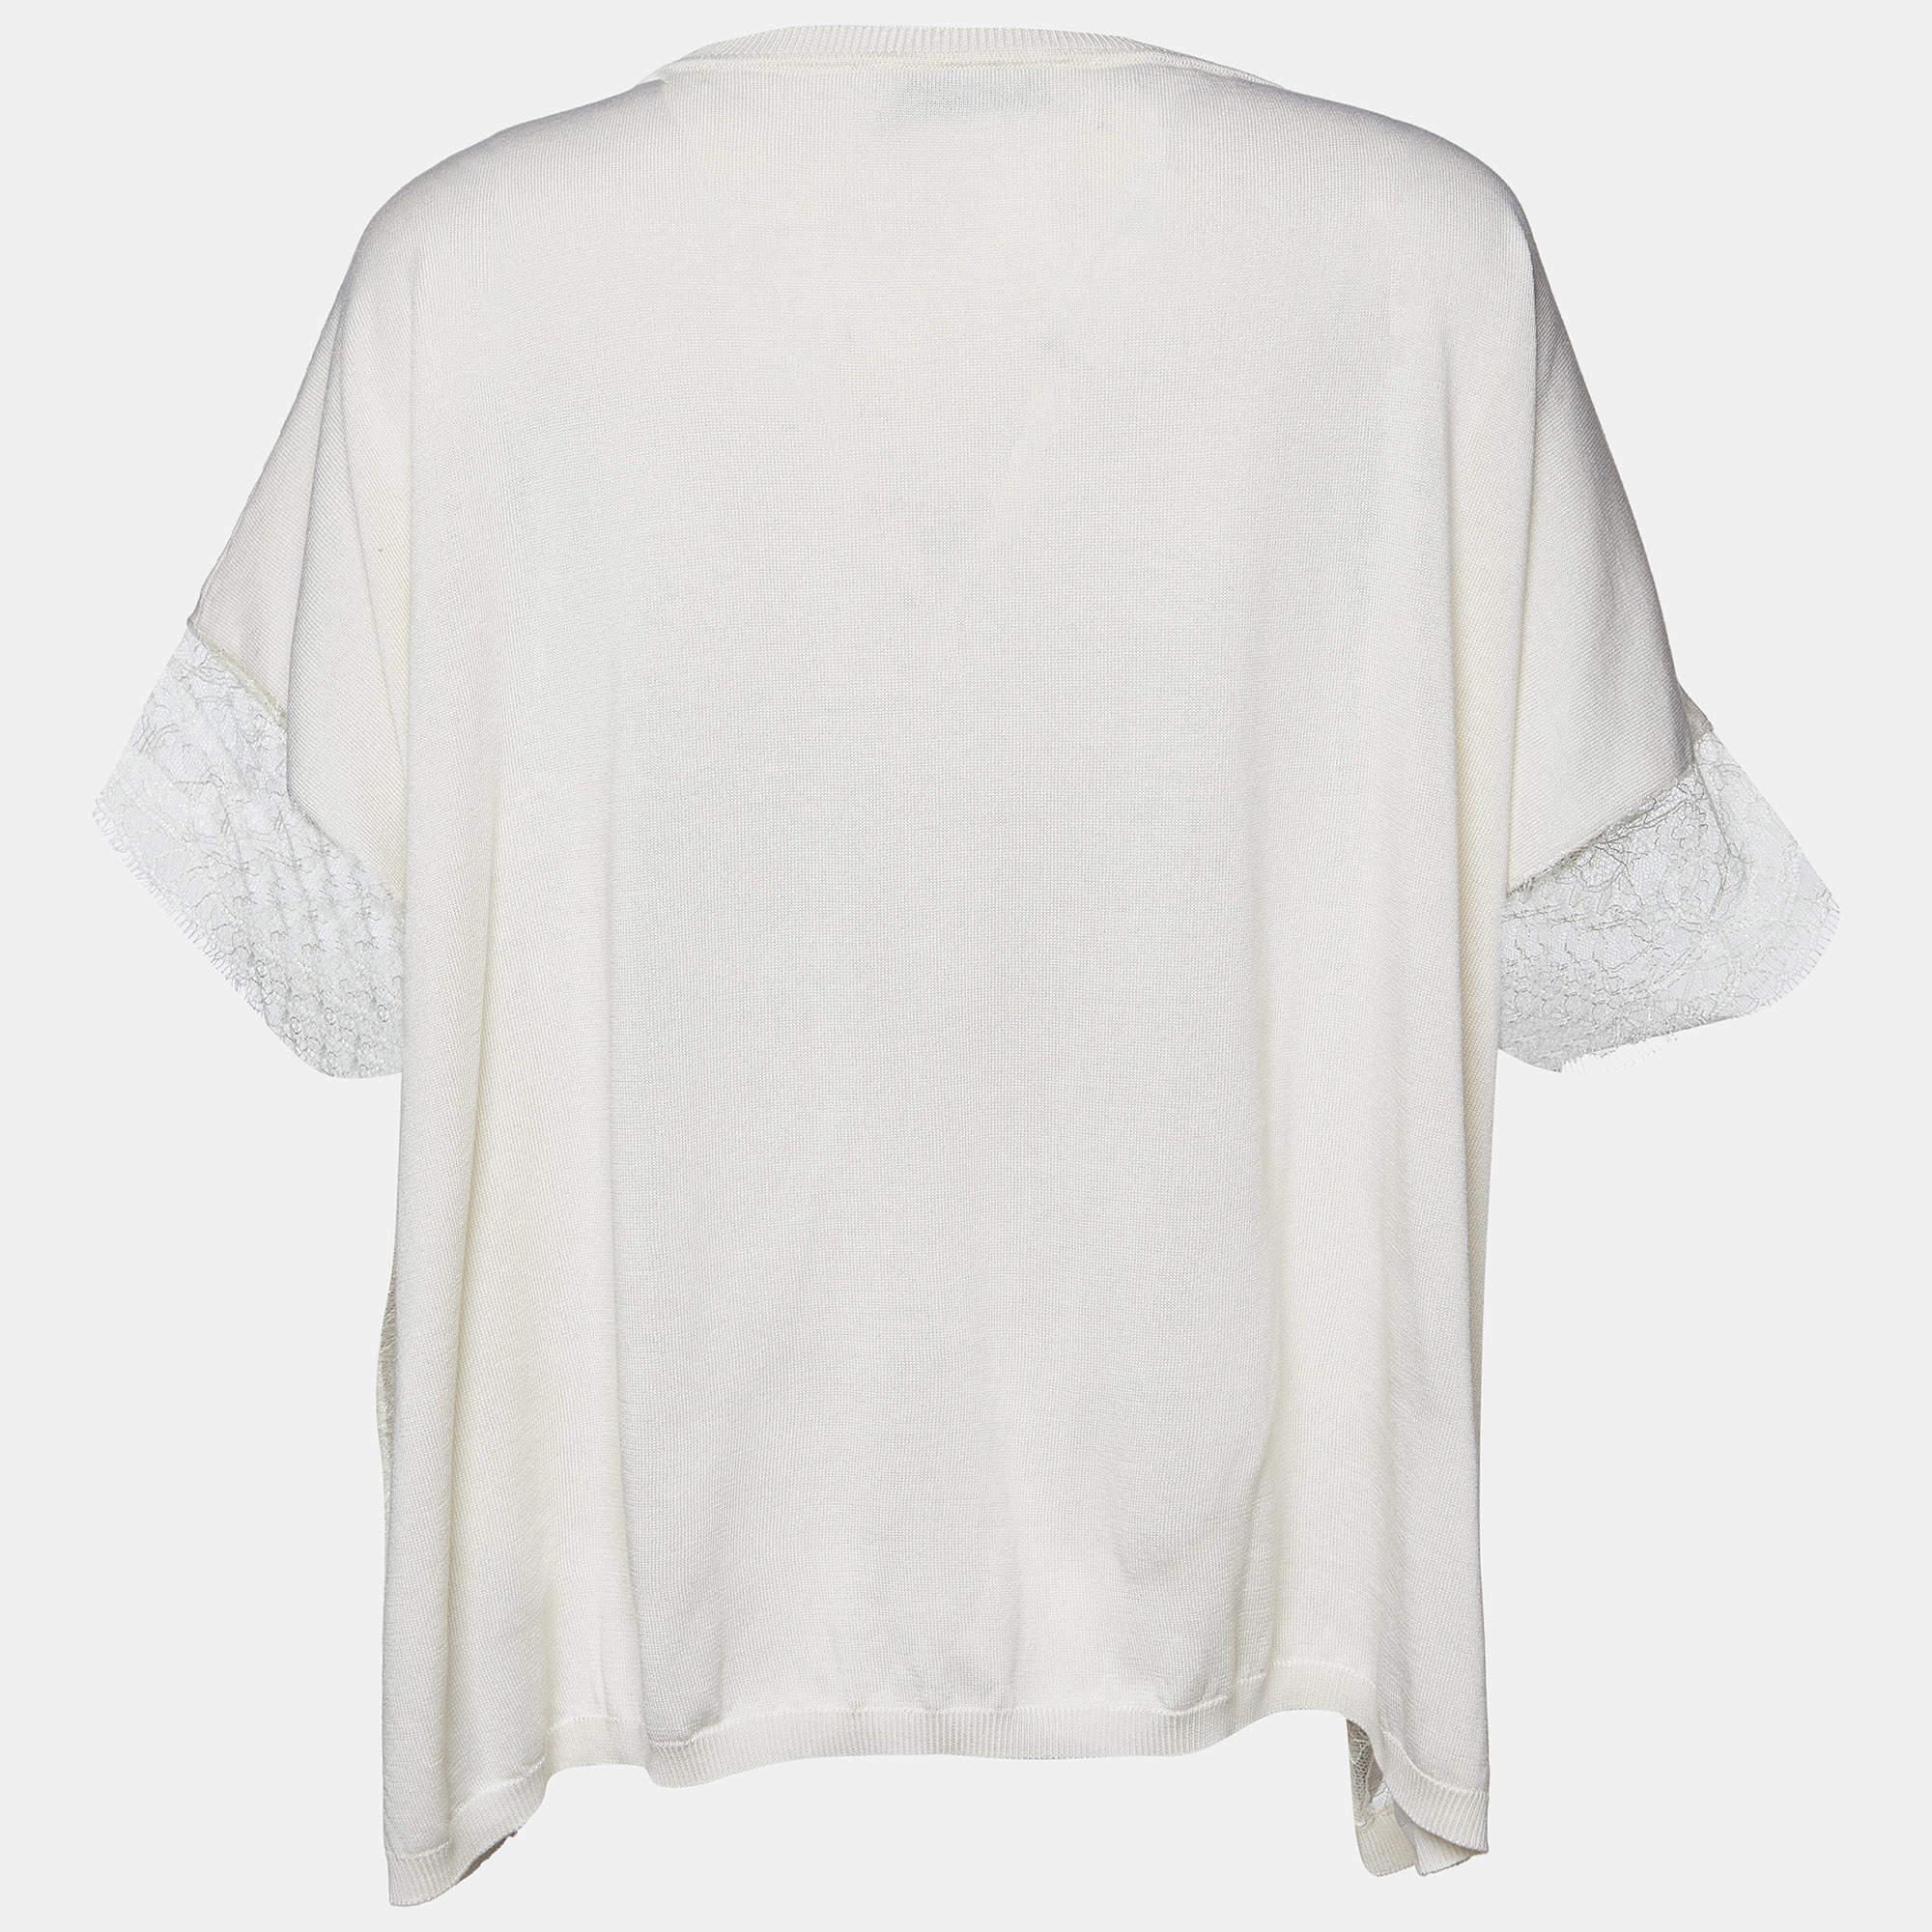 The Valentino jumper is an exquisite blend of luxury and sophistication. This pullover features delicate lace trim, combining cozy comfort with feminine elegance for a timeless and versatile wardrobe essential.

Includes: Price Tag